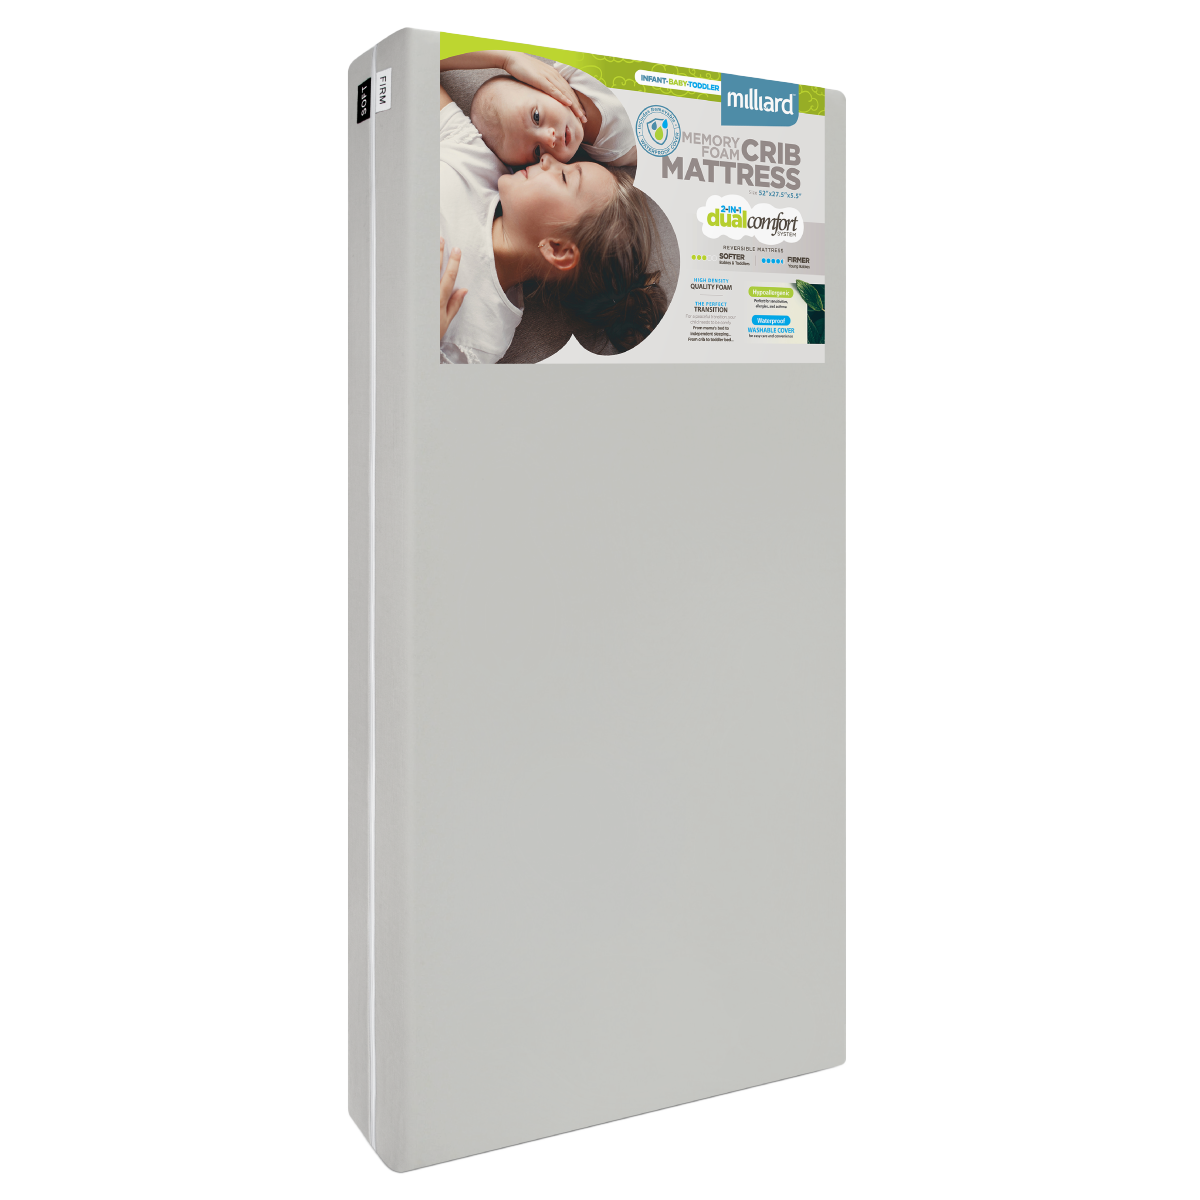 1000 Crib and Toddler Mattress, Extra Firm Triple-laminated